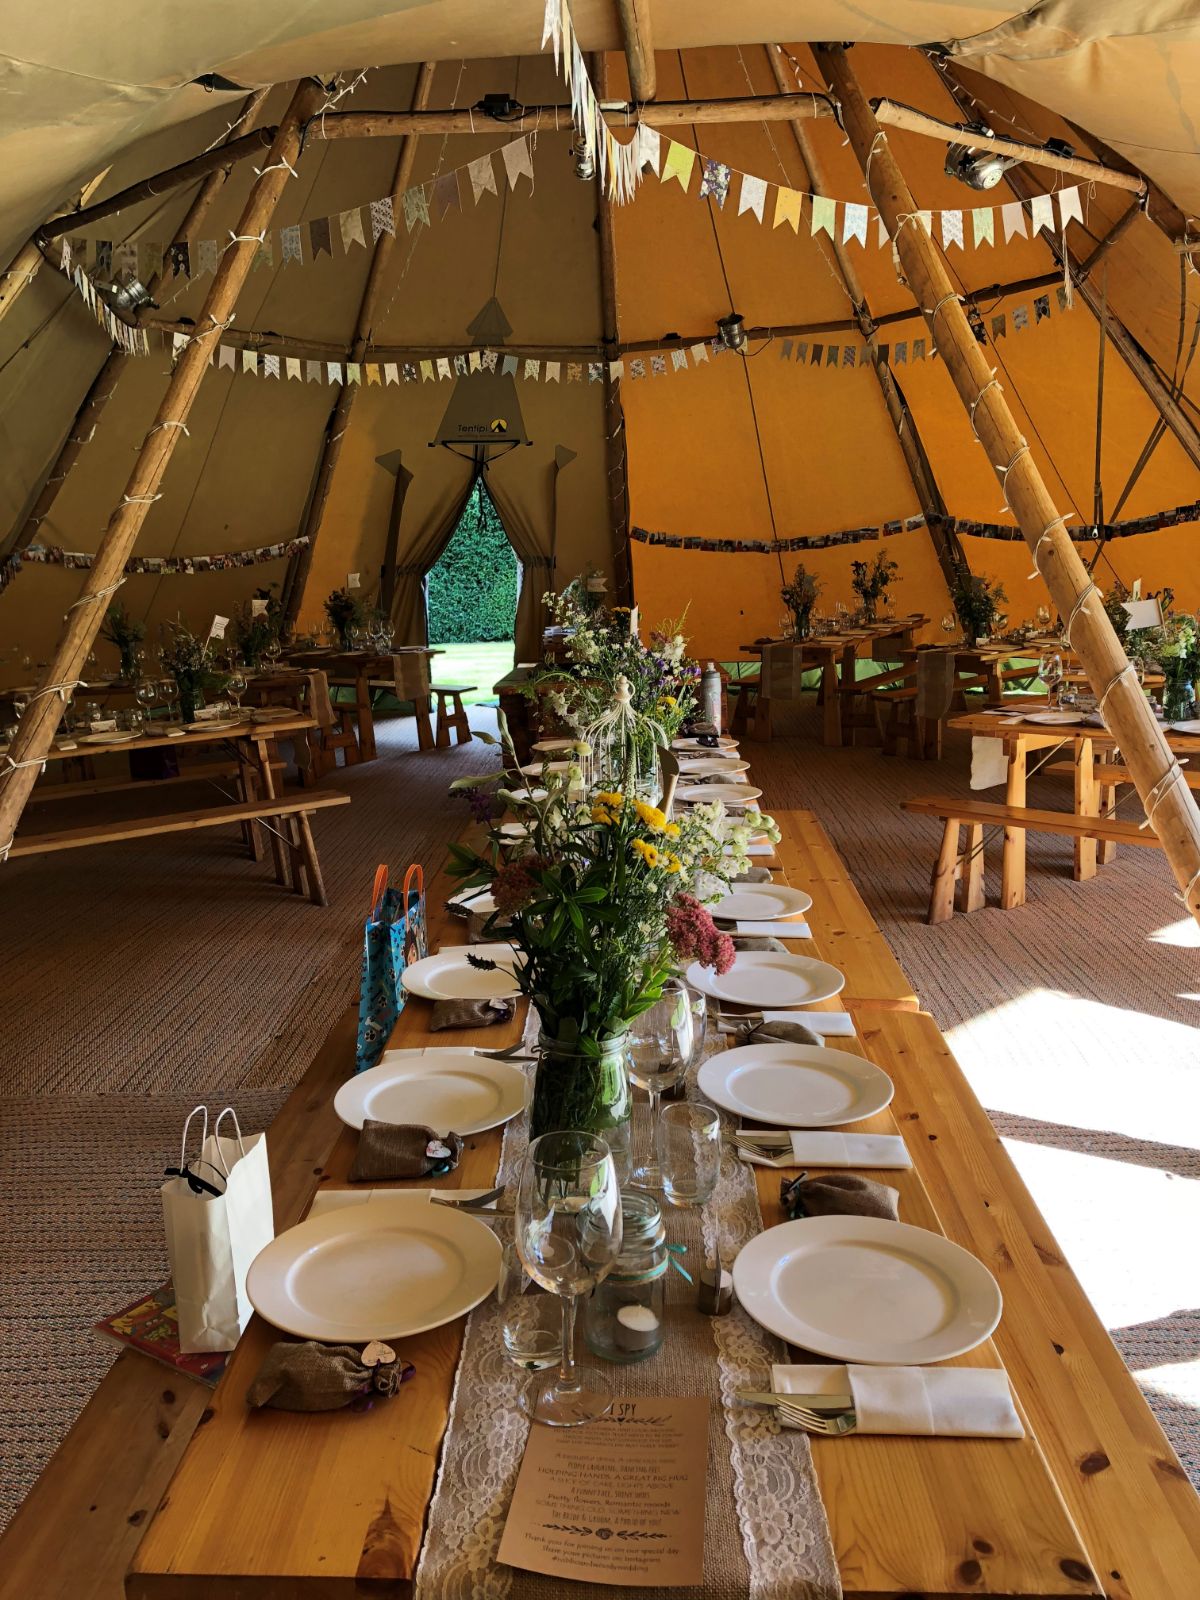 The outdoors theme looking great in the Tipis